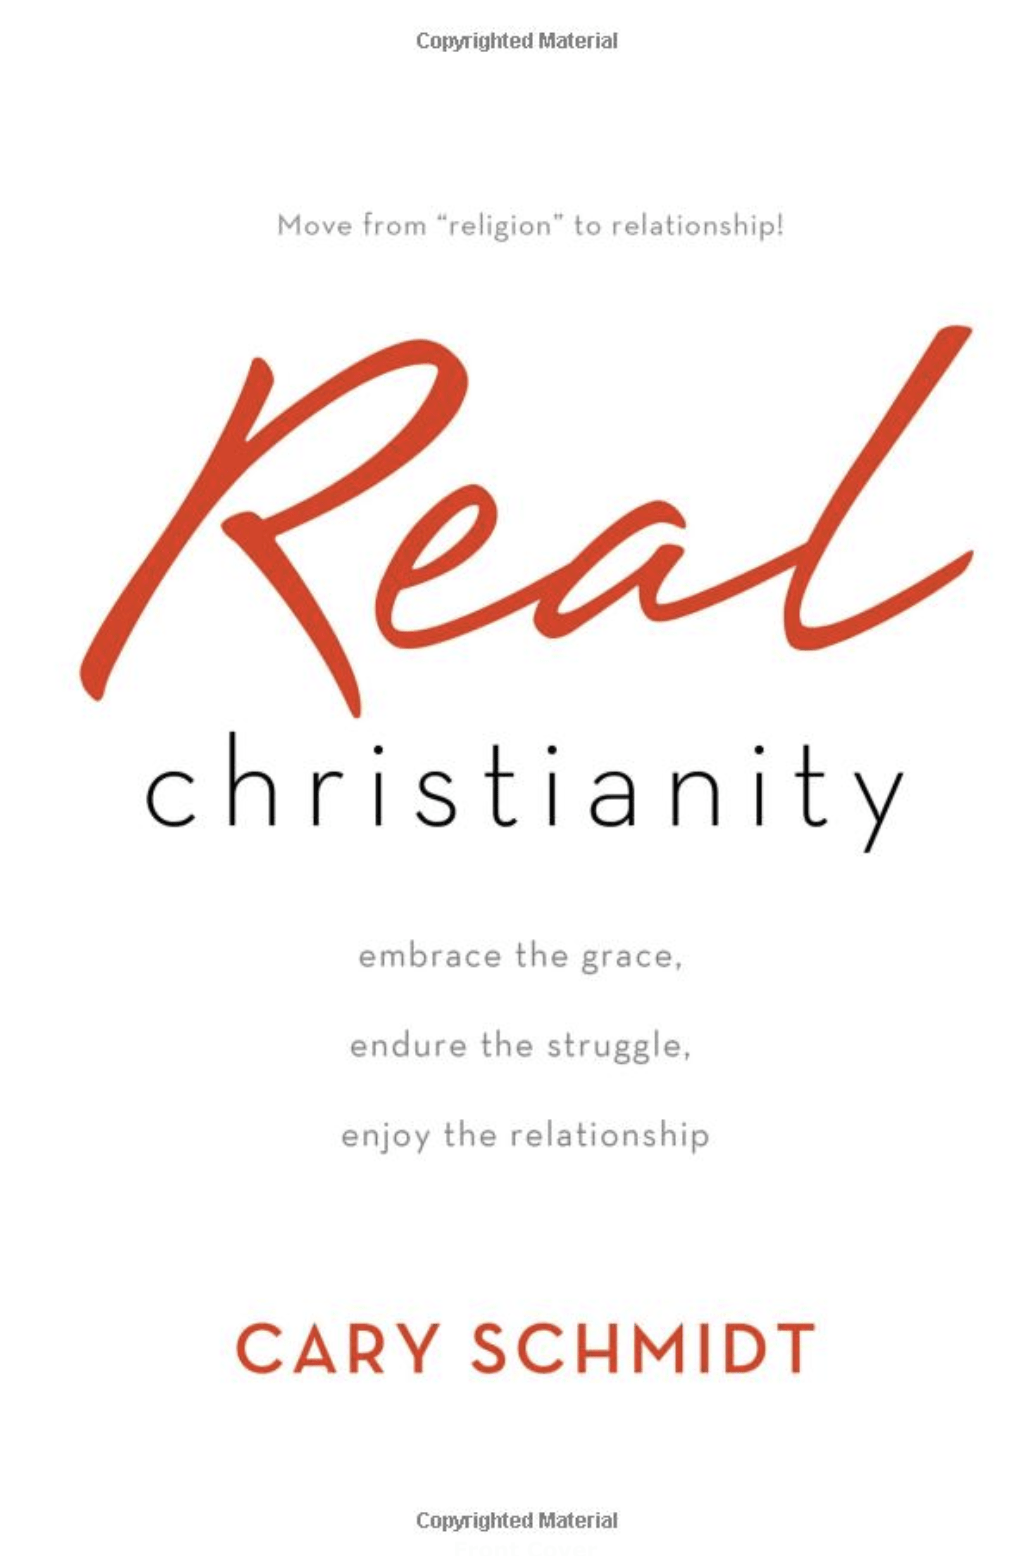 Real Christianity by Cary Schmidt